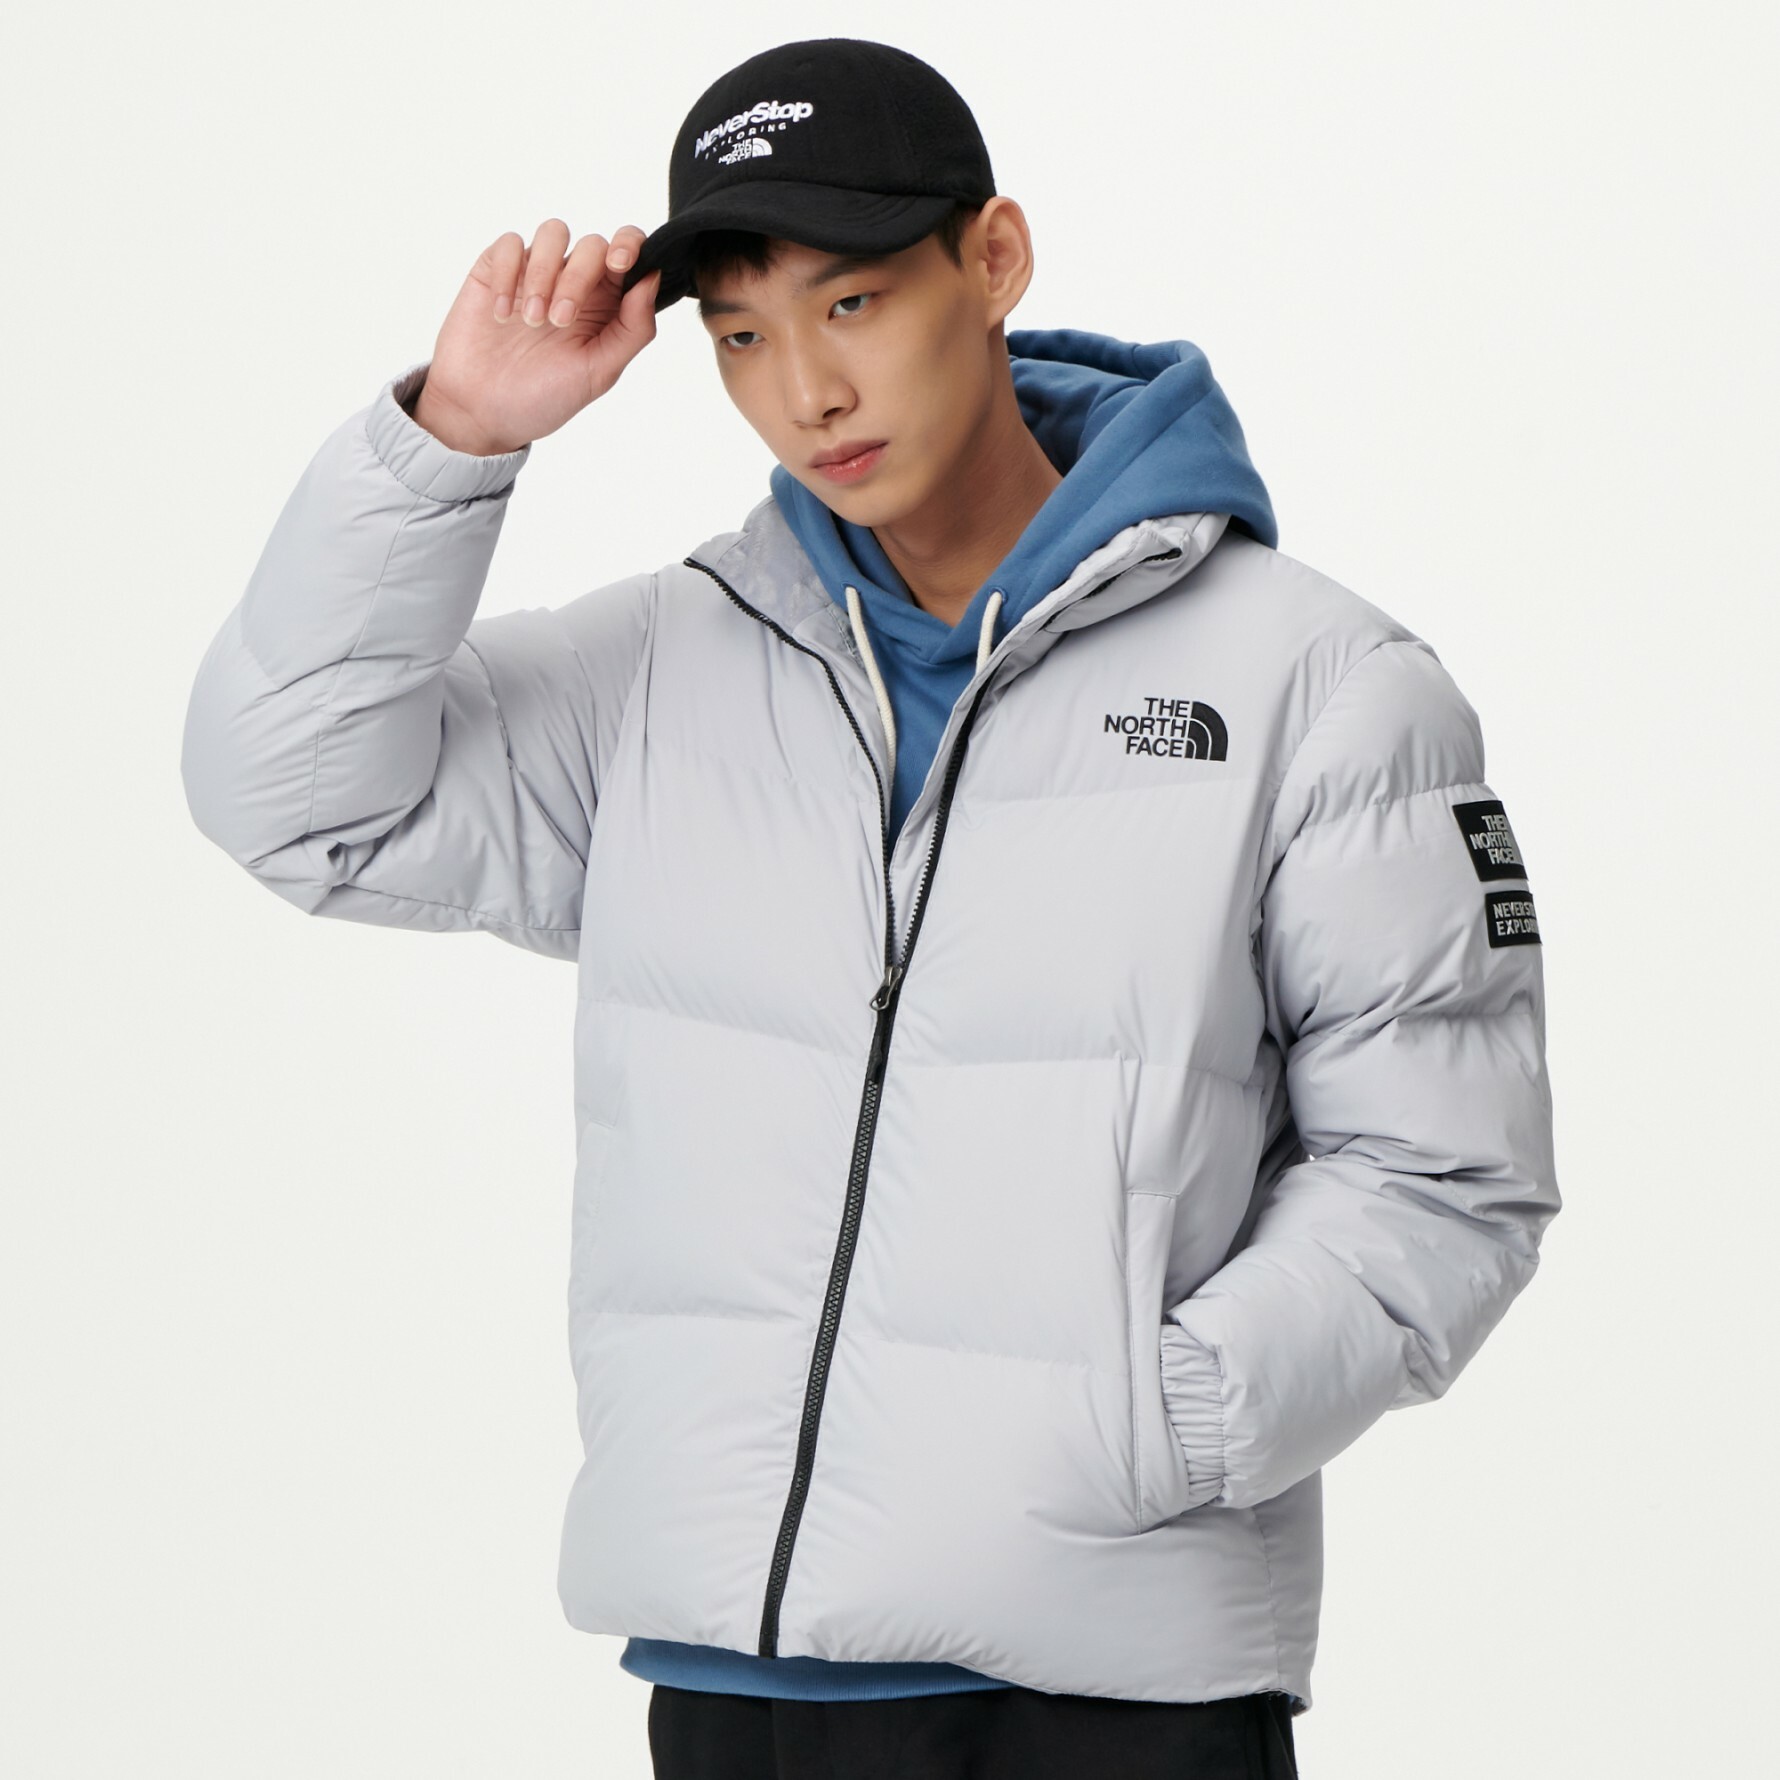 THE NORTH FACE ASPEN ON BALL JACKET